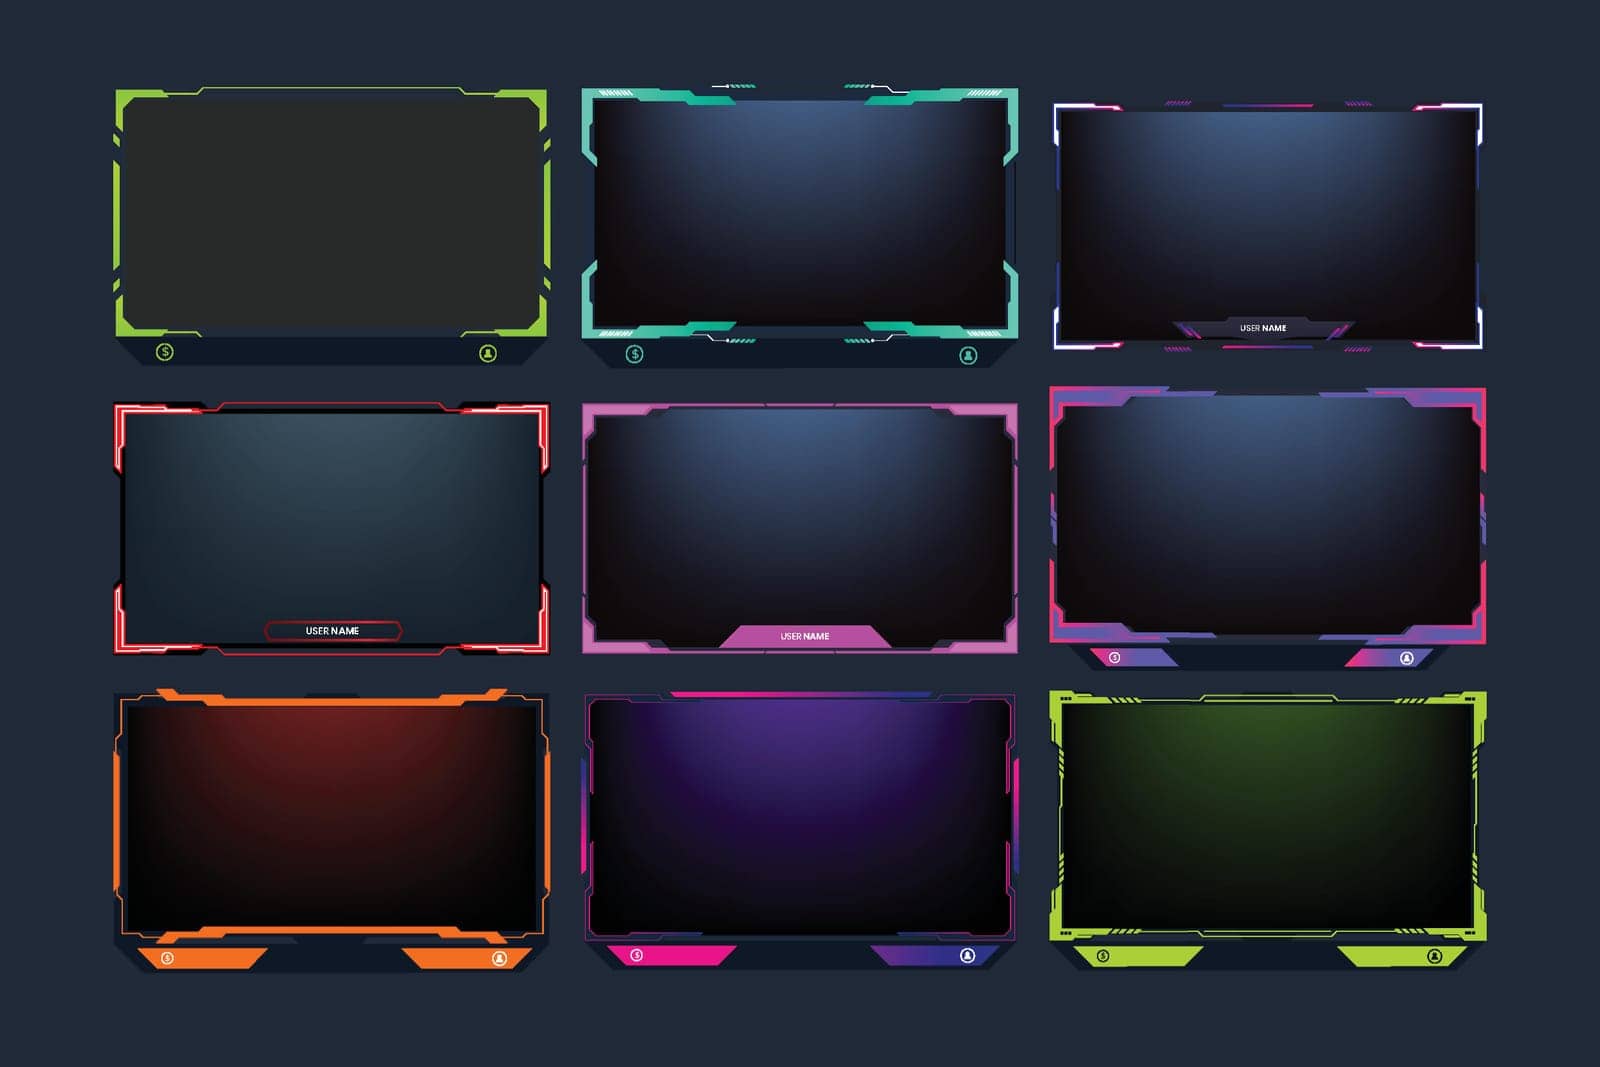 Live streaming overlay design collection for screen panels. Futuristic green, purple, and orange gaming overlay bundle for online gamers. Live stream overlay set vector with colorful buttons.